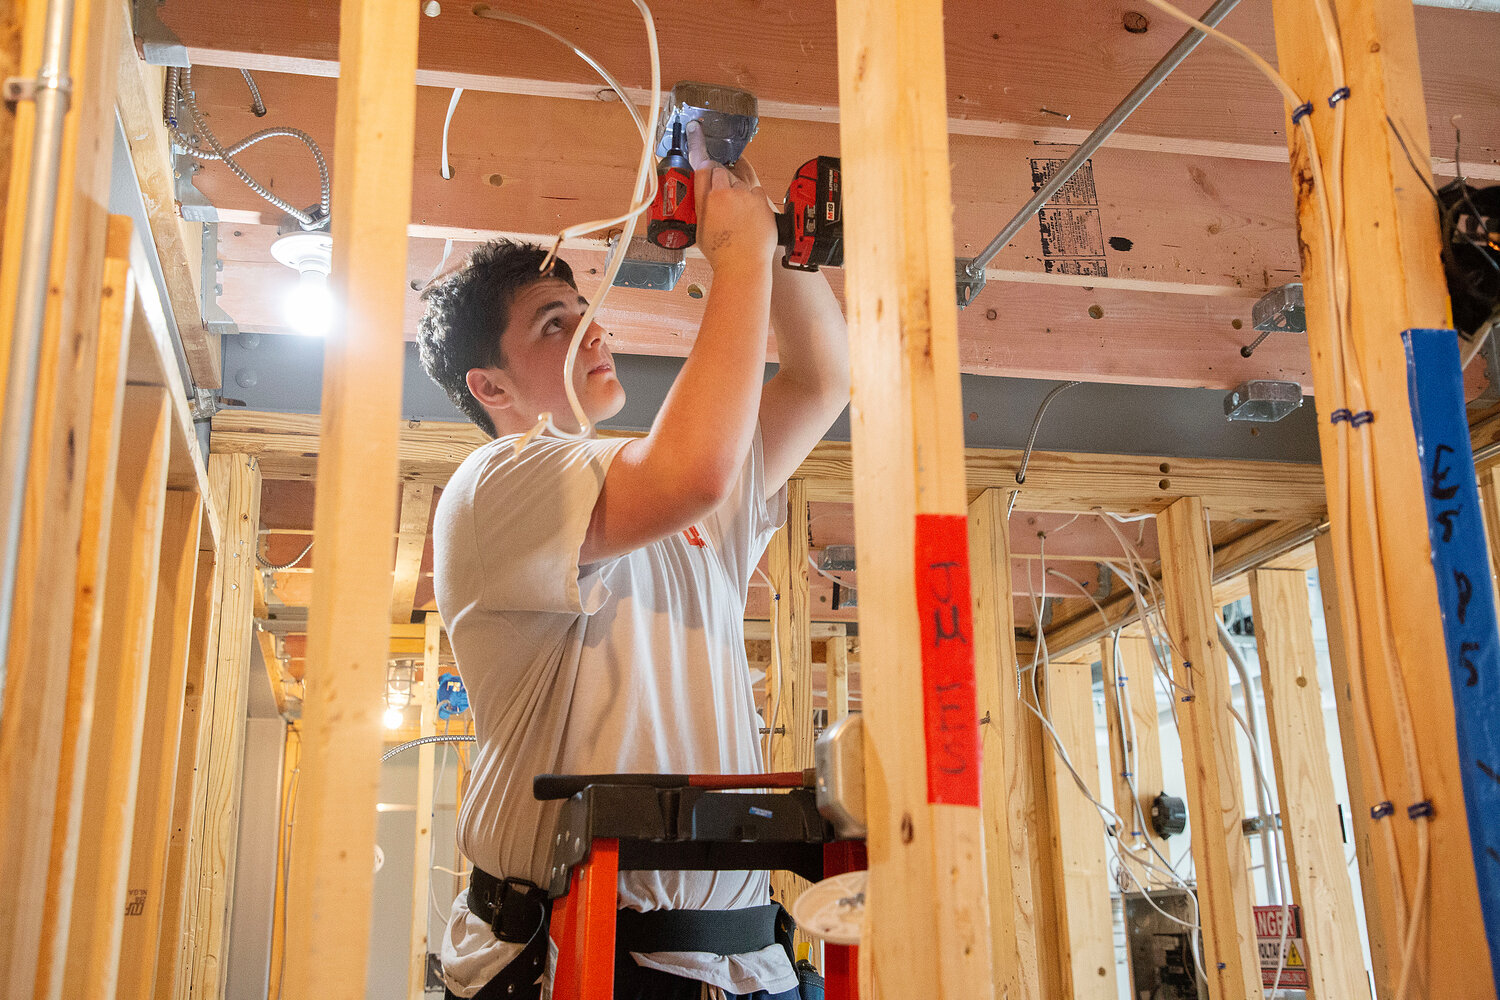 Machar Francis screws a lighting box into place inside the Electrical room at East Providence High School. Construction students framed wood stud walls within the room, and the electrical students practice both residential and commercial wiring.